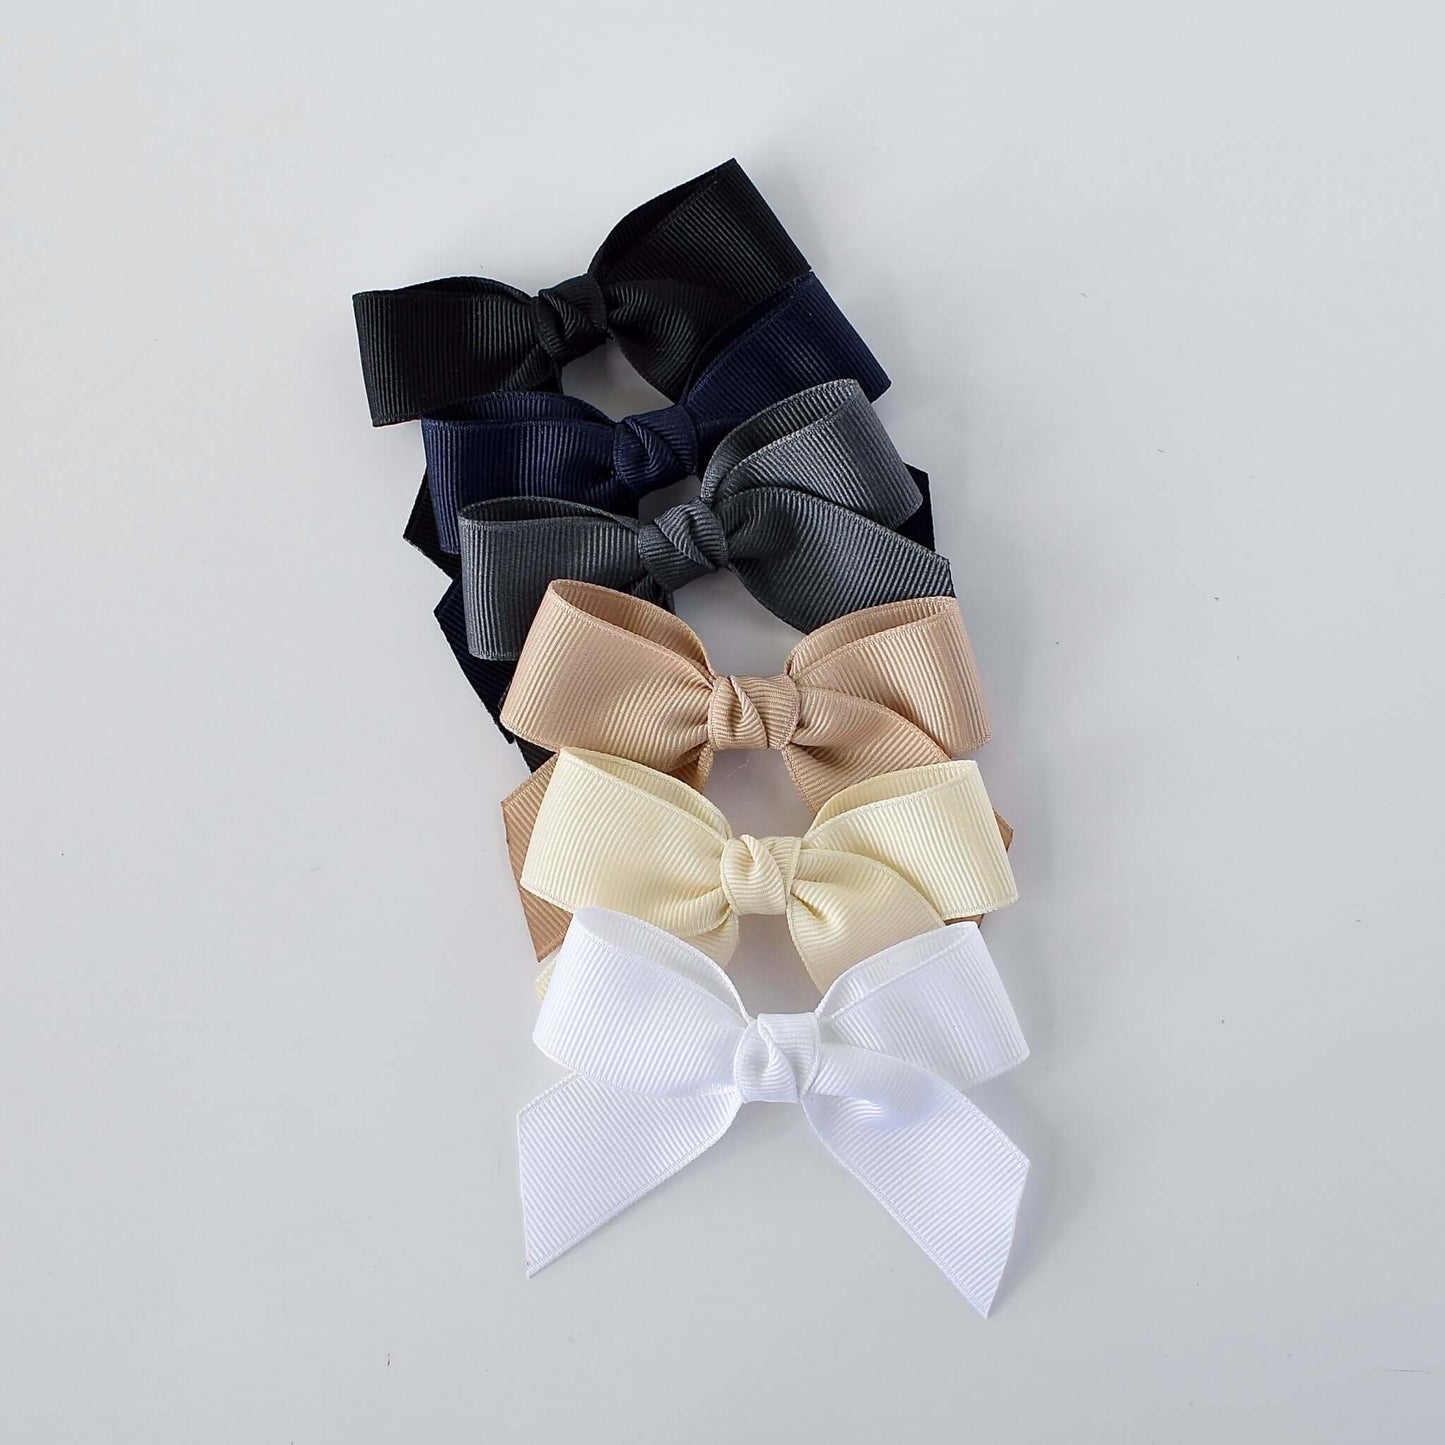 Assorted 3 inch grosgrain sailor bow clips in black, gray, navy, taupe, ivory, and white for babies, toddlers, and little girls